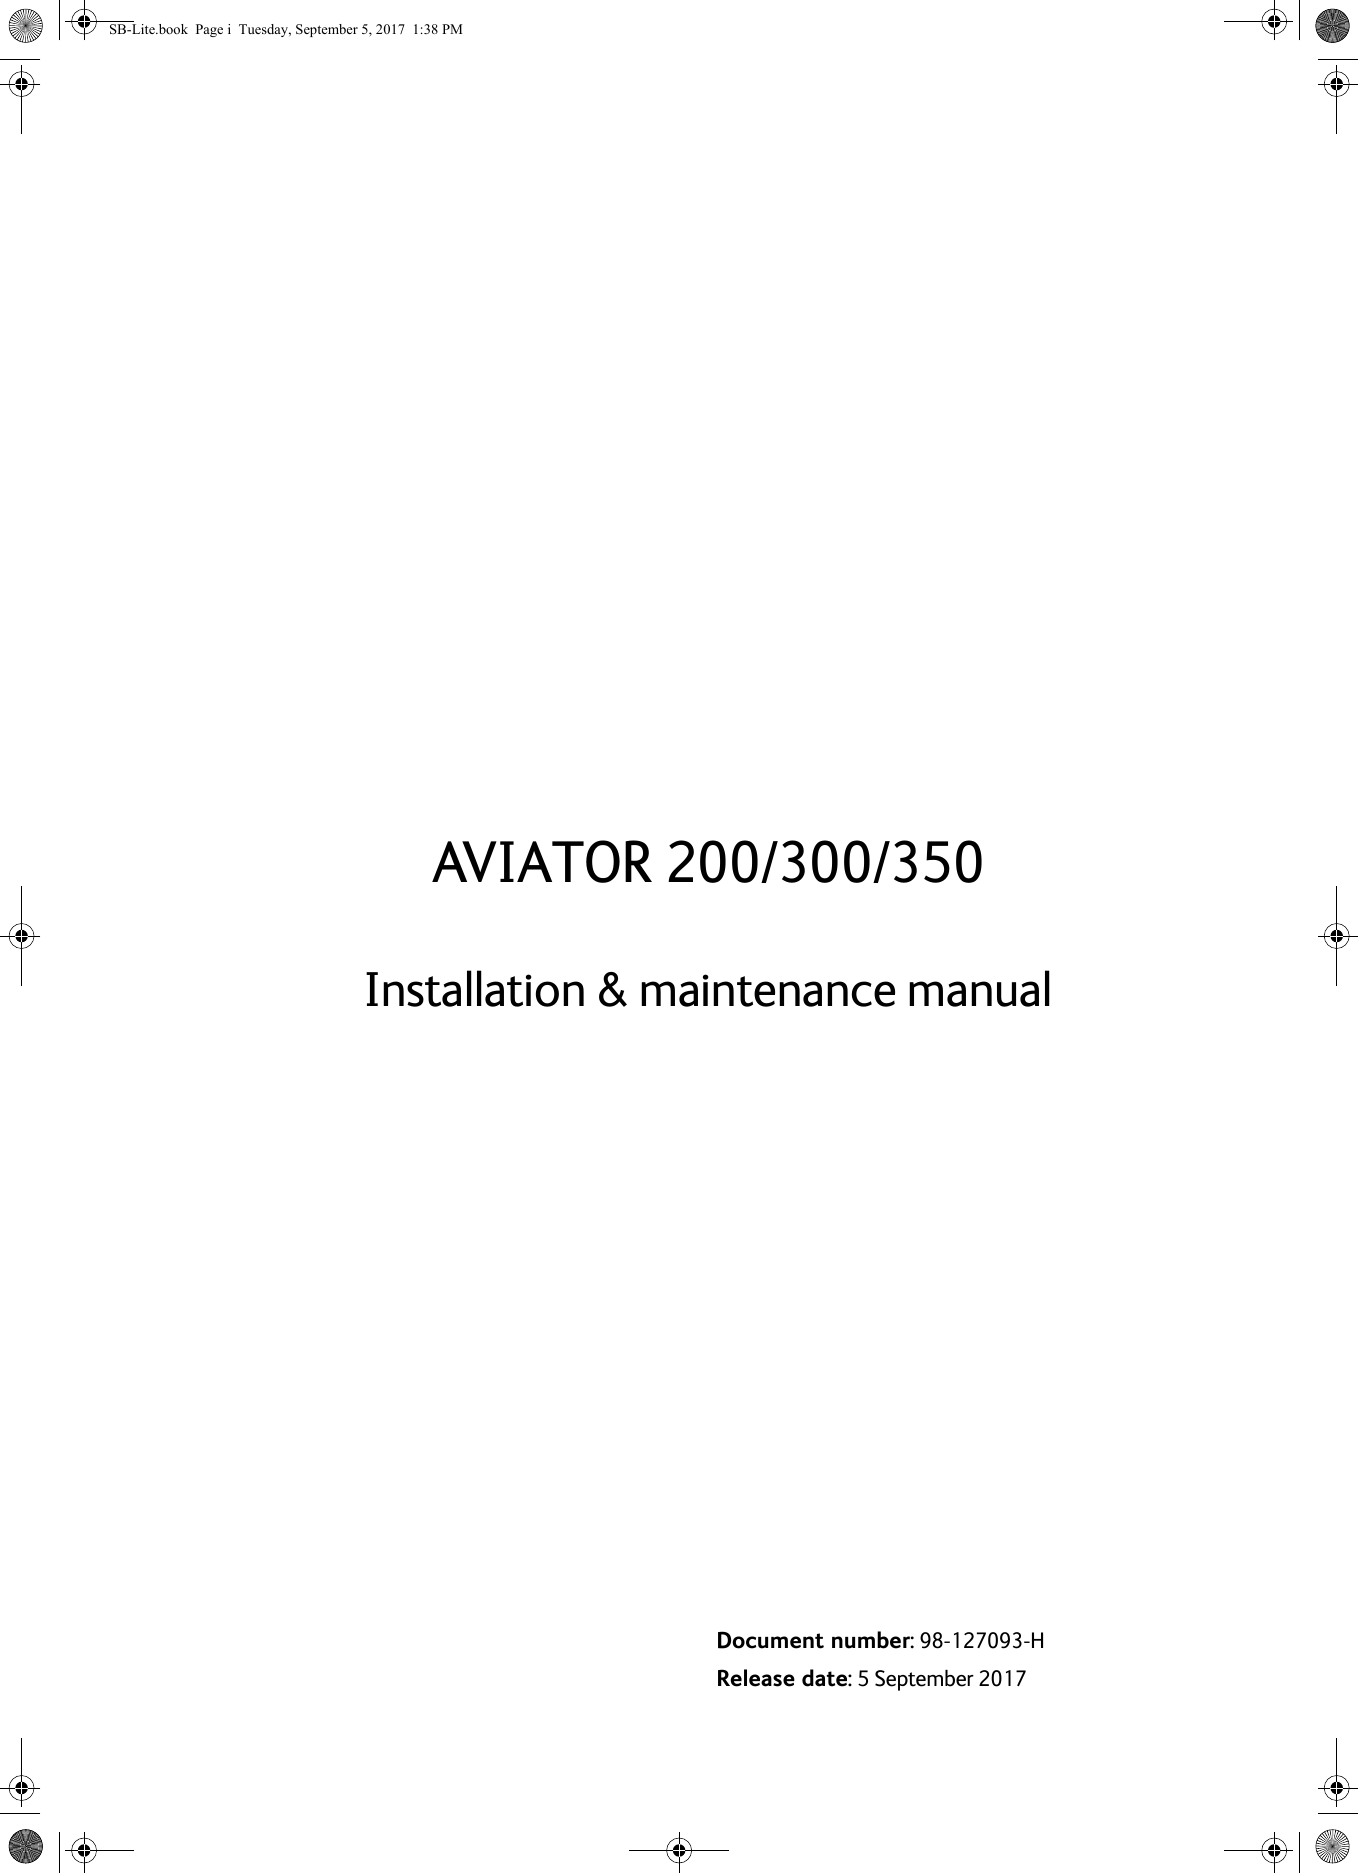 AVIATOR  200/300/350Document number: 98-127093-HRelease date: 5  September  2017Installation &amp; maintenance manualSB-Lite.book  Page i  Tuesday, September 5, 2017  1:38 PM